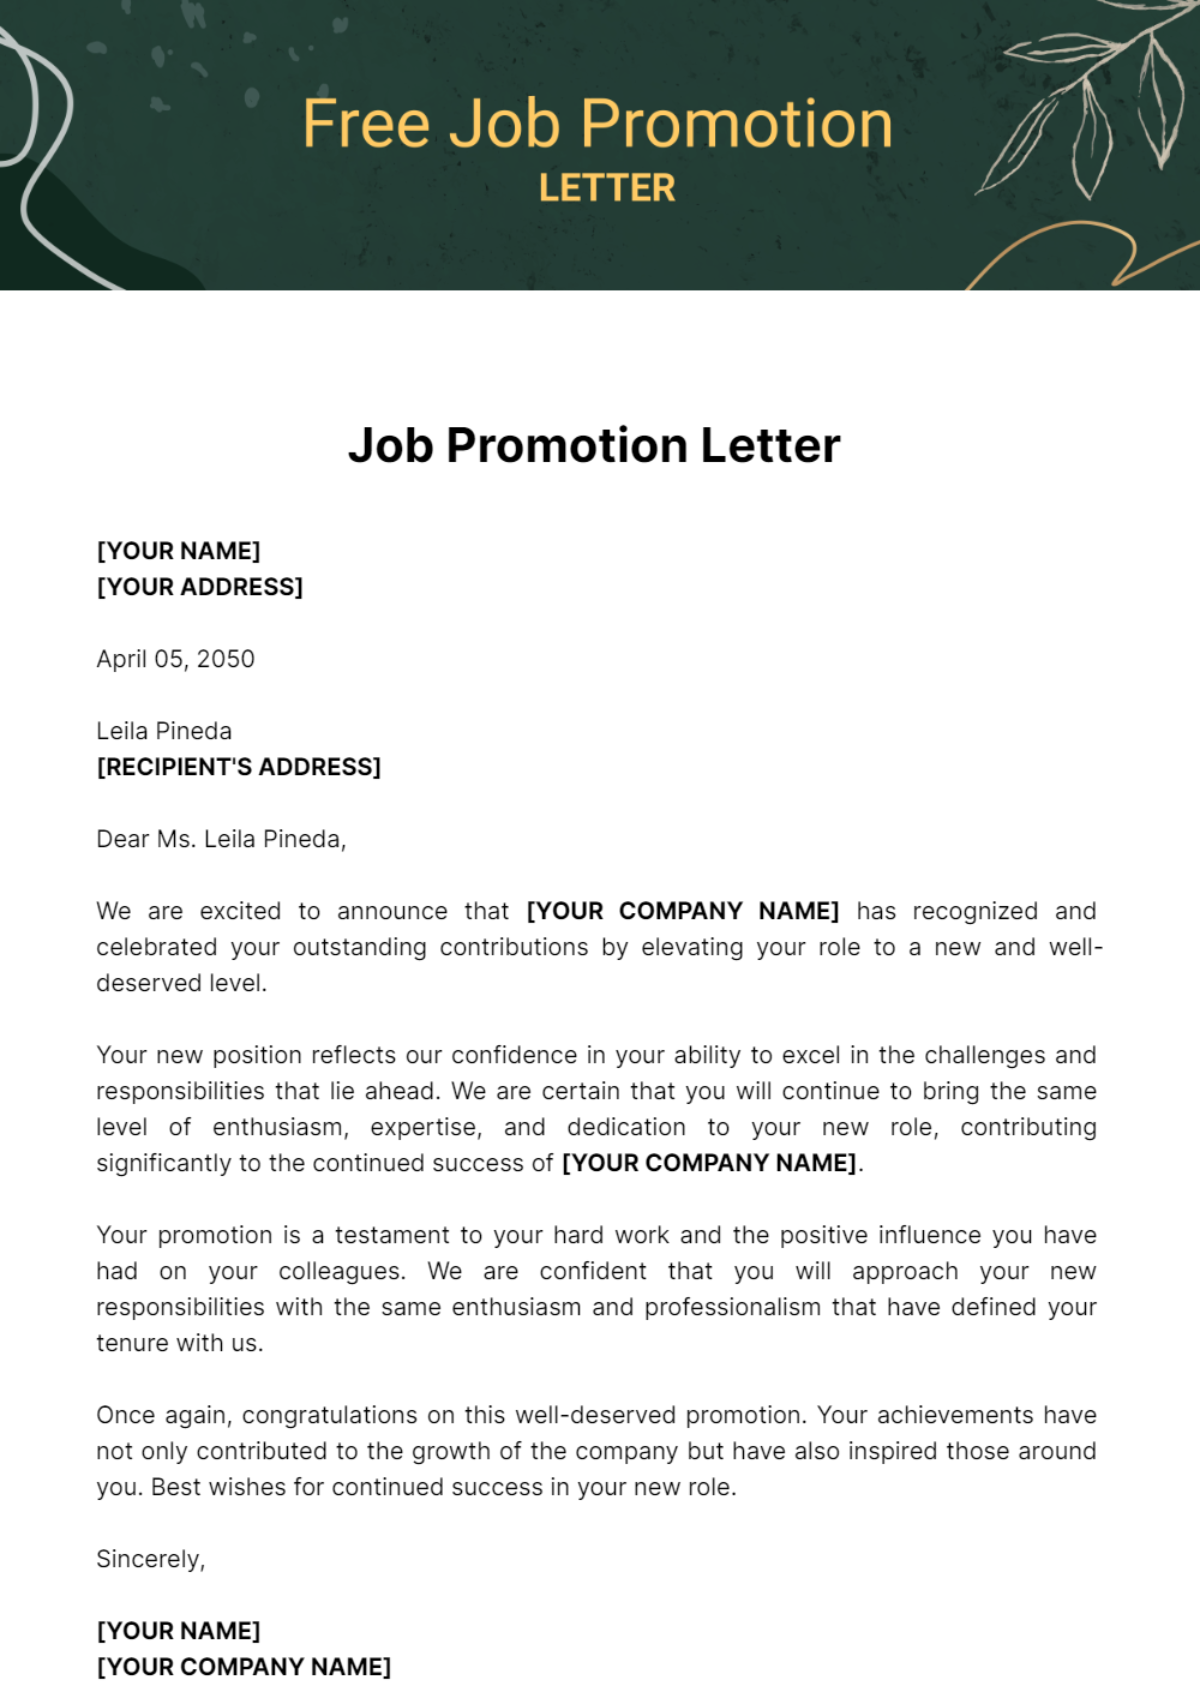 Free Job Promotion Letter Template